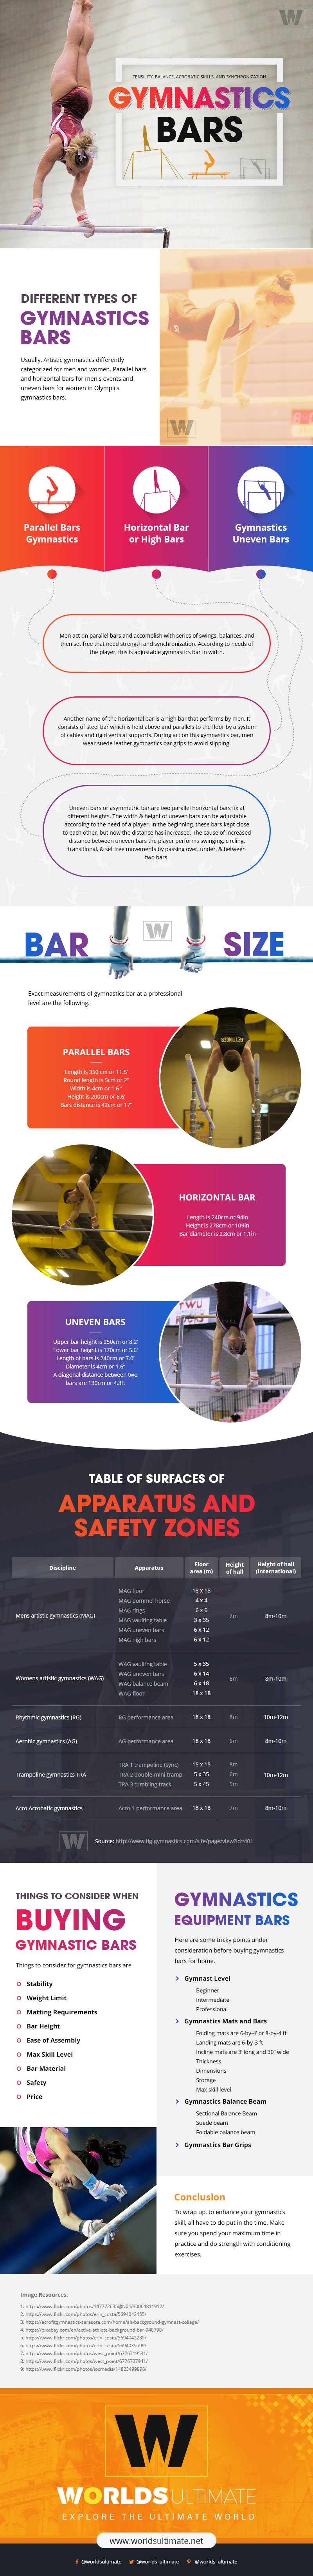 Gymnastics Bars (Reviews, Buying Guide) [Infographic]